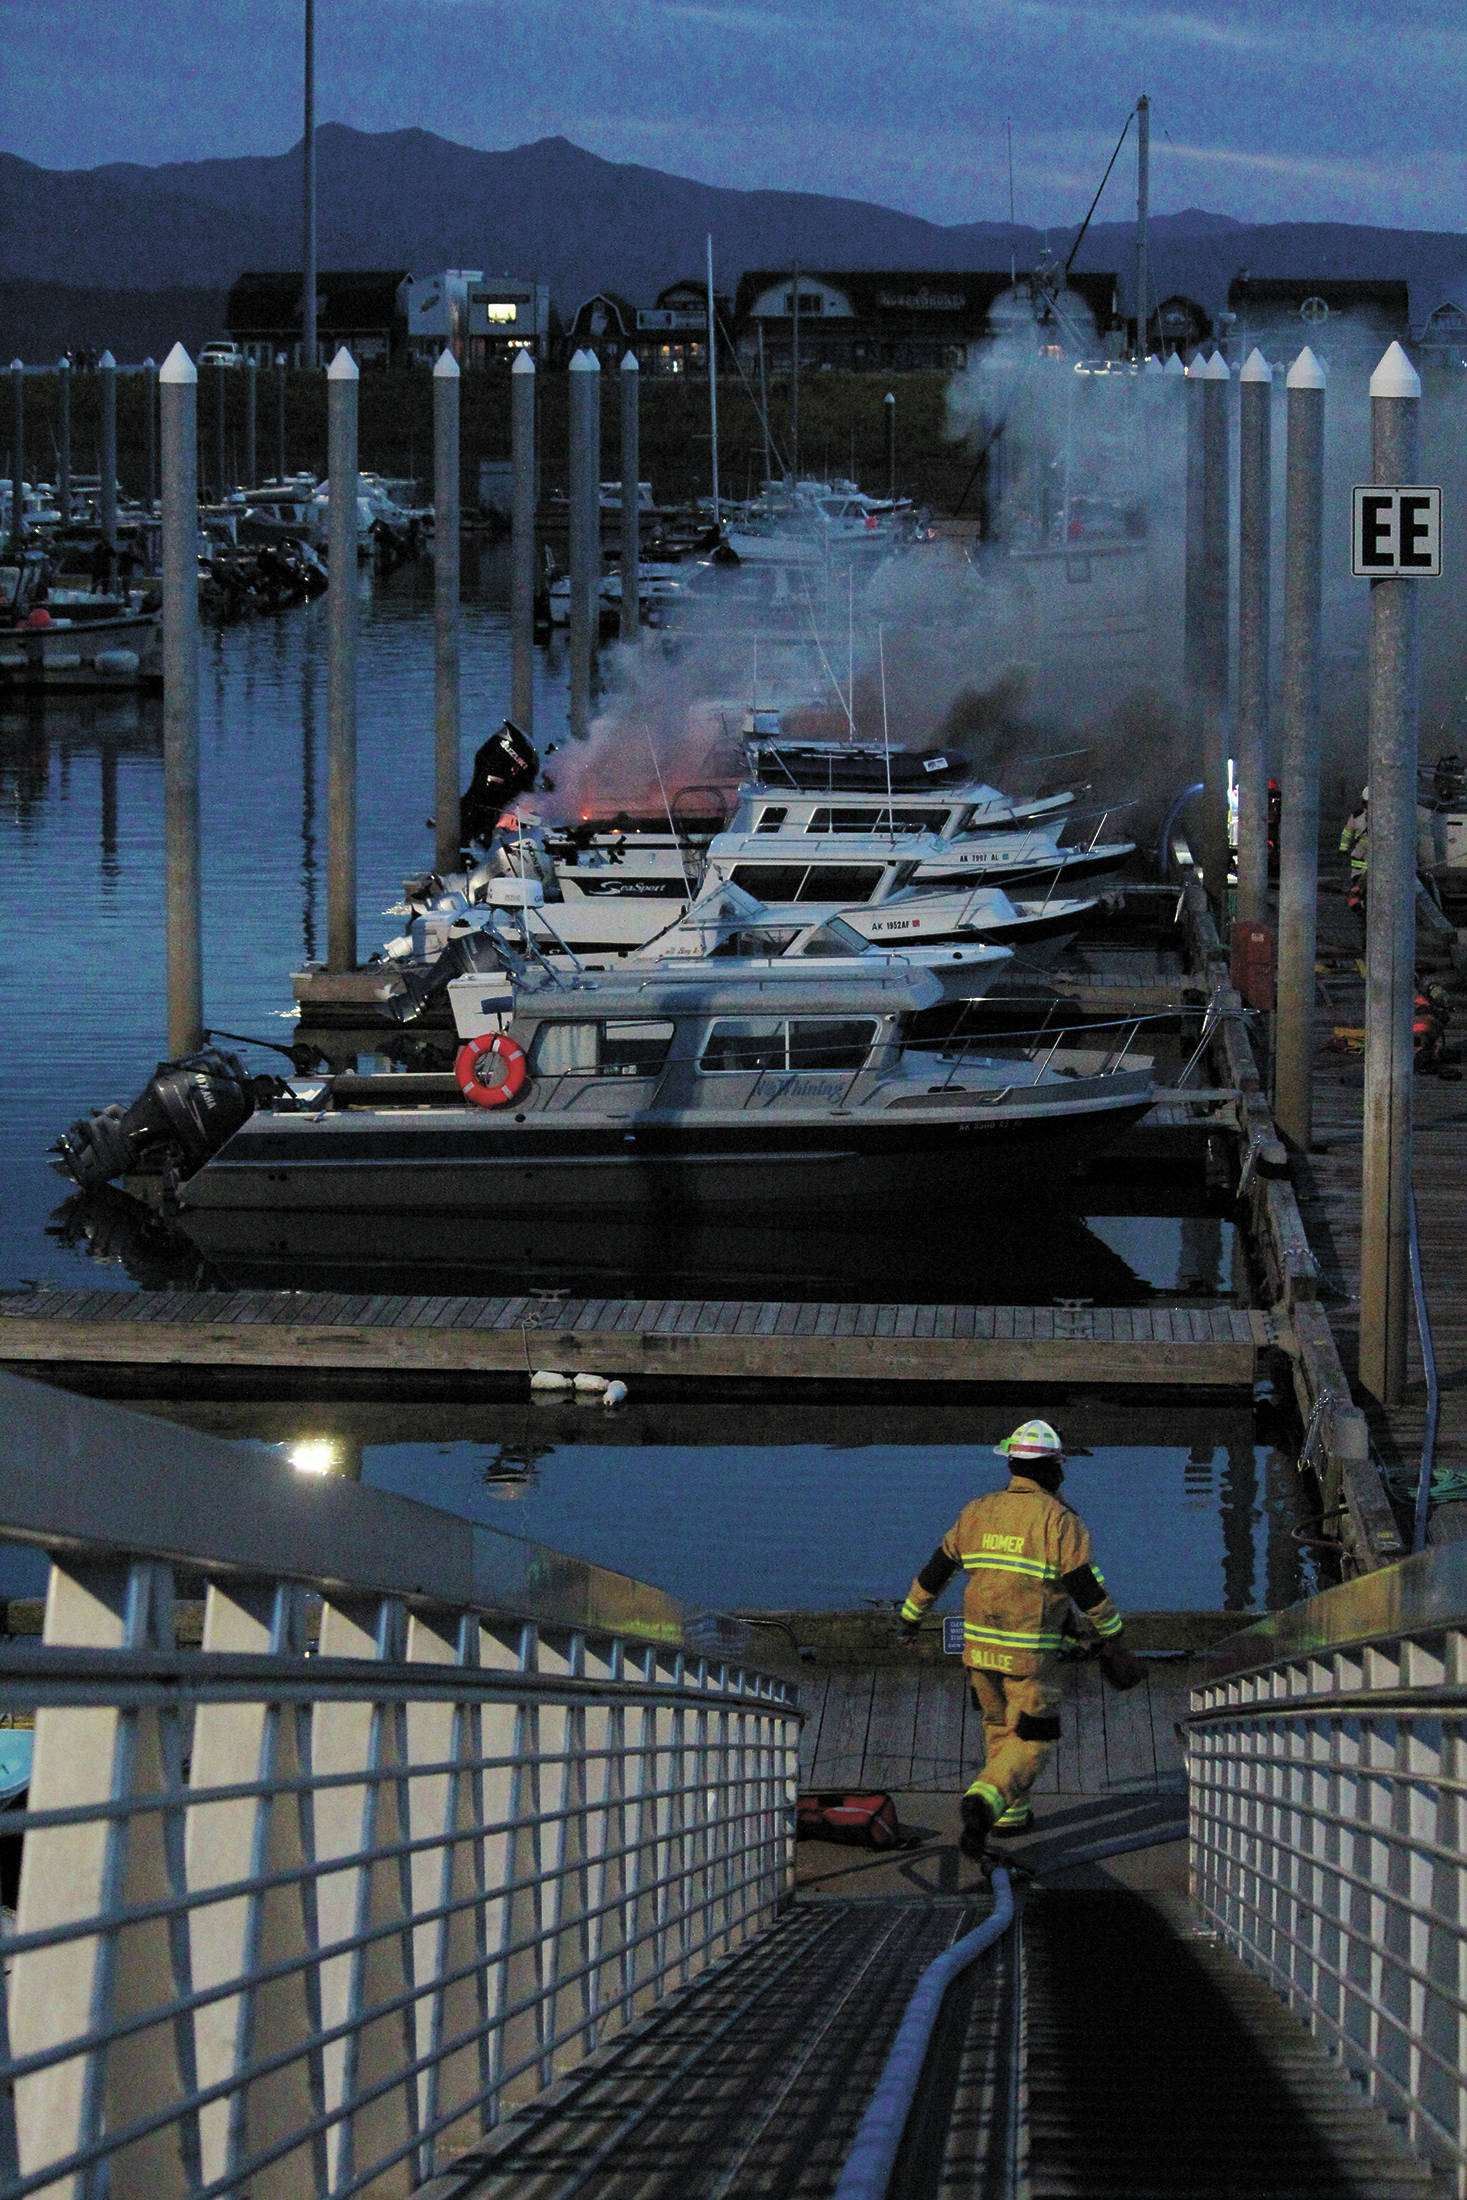 A member of the Homer Volunteer Fire Department walks toward a boat fire on Friday, Sept. 11, 2020 in the Homer Harbor in Homer, Alaska. Firefighters doused the blaze that caught on a 32-foot fiberglass boat that evening. (Photo by Megan Pacer/Homer News)